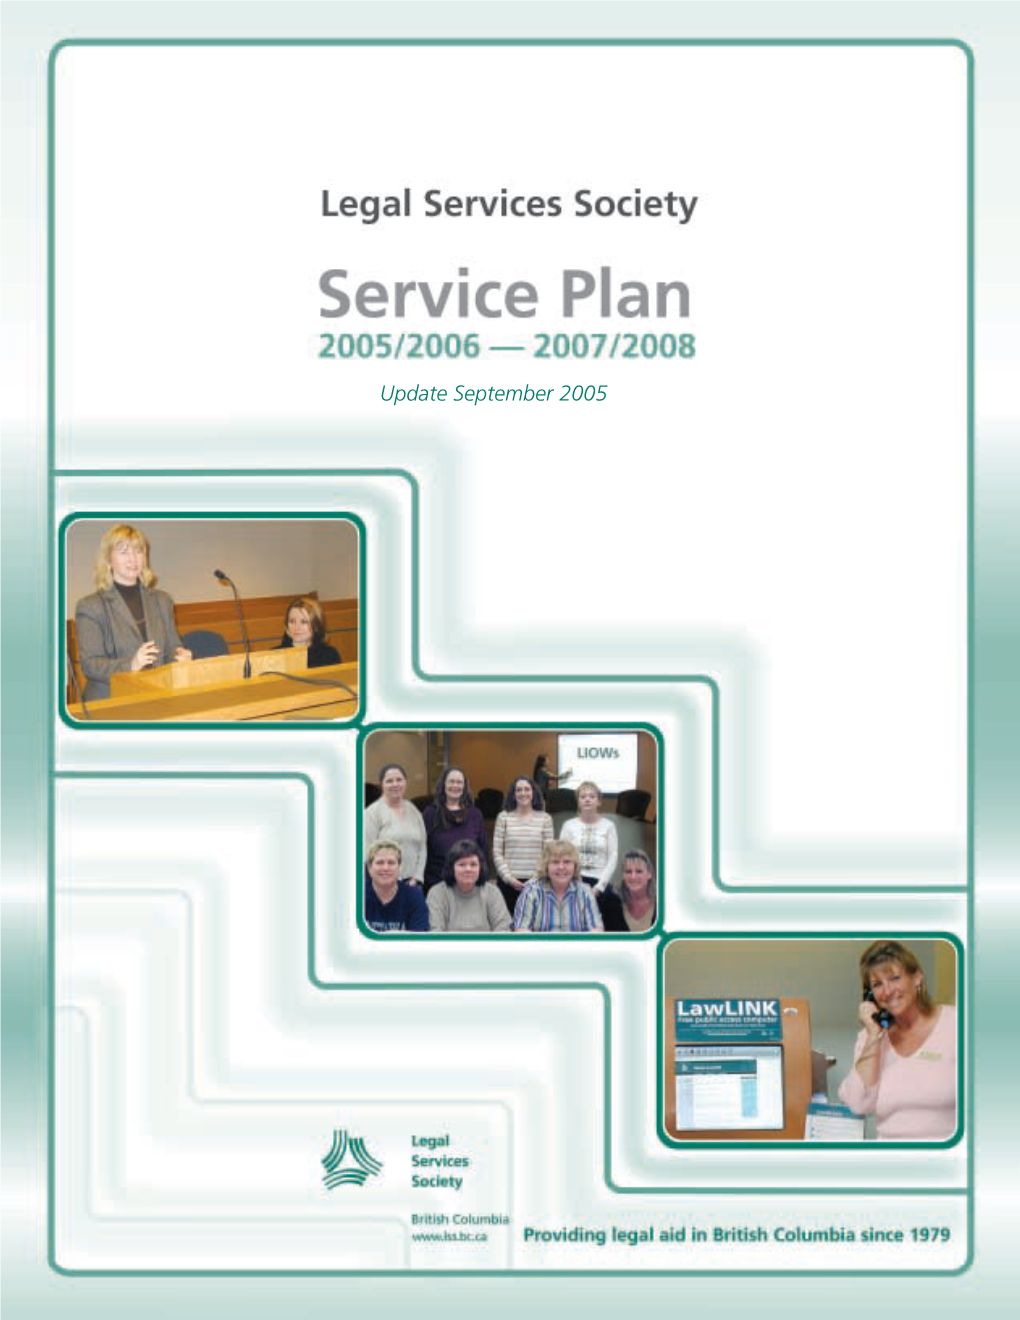 Legal Services Society 400 – 510 Burrard Street Vancouver, British Columbia V6C 3A8 Telephone: (604) 601-6075 Fax: (604) 682-0965 Website